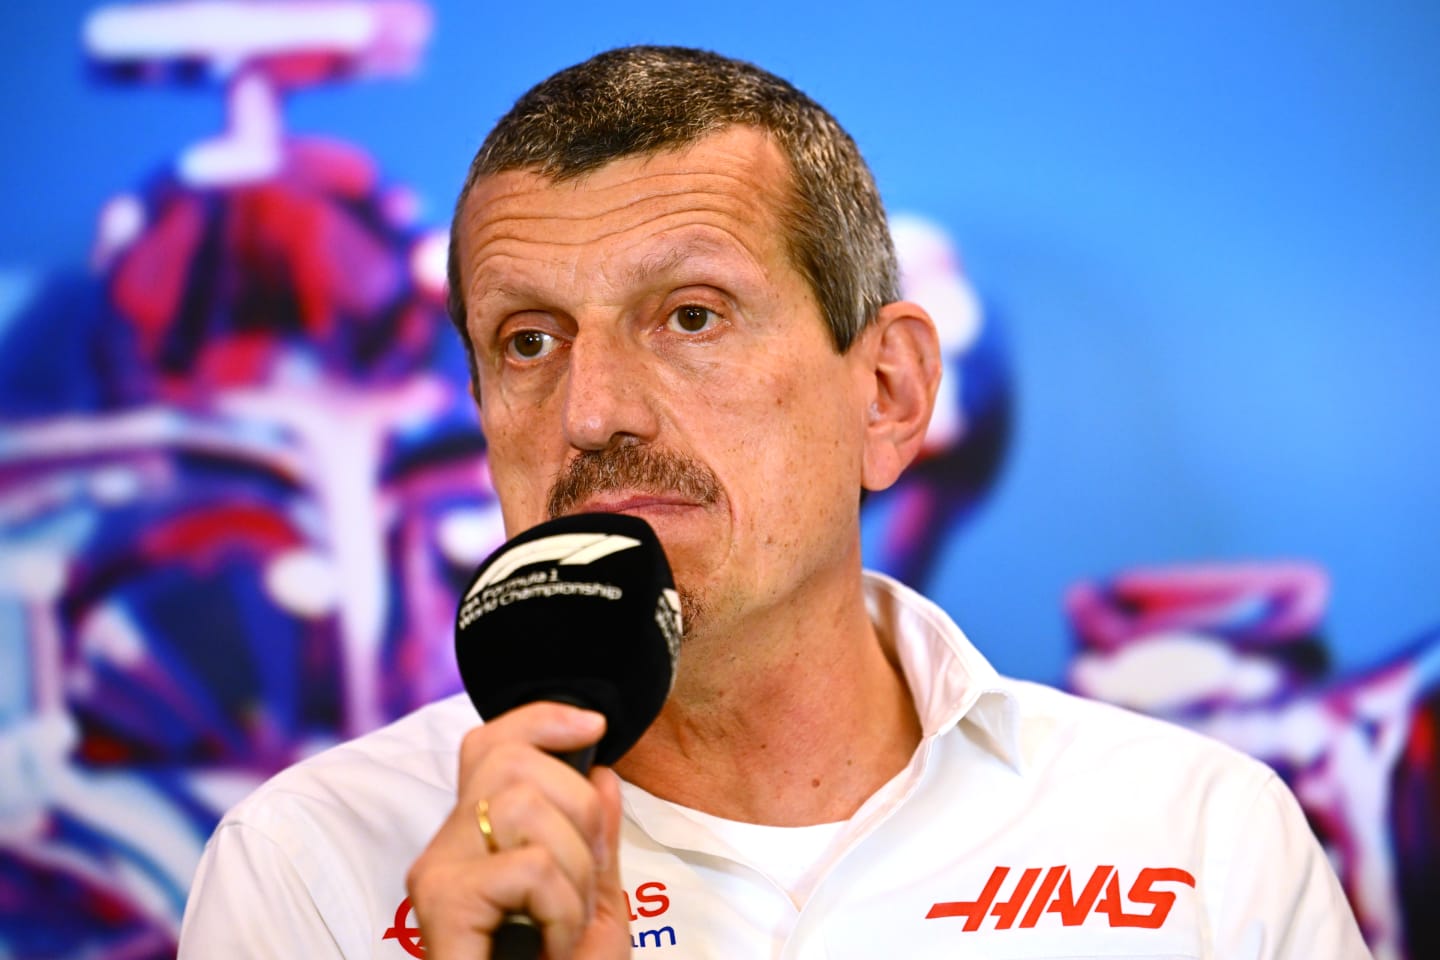 AUSTIN, TEXAS - OCTOBER 22: Haas F1 Team Principal Guenther Steiner attends the Team Principals Press Conference prior to final practice ahead of the F1 Grand Prix of USA at Circuit of The Americas on October 22, 2022 in Austin, Texas. (Photo by Clive Mason/Getty Images)